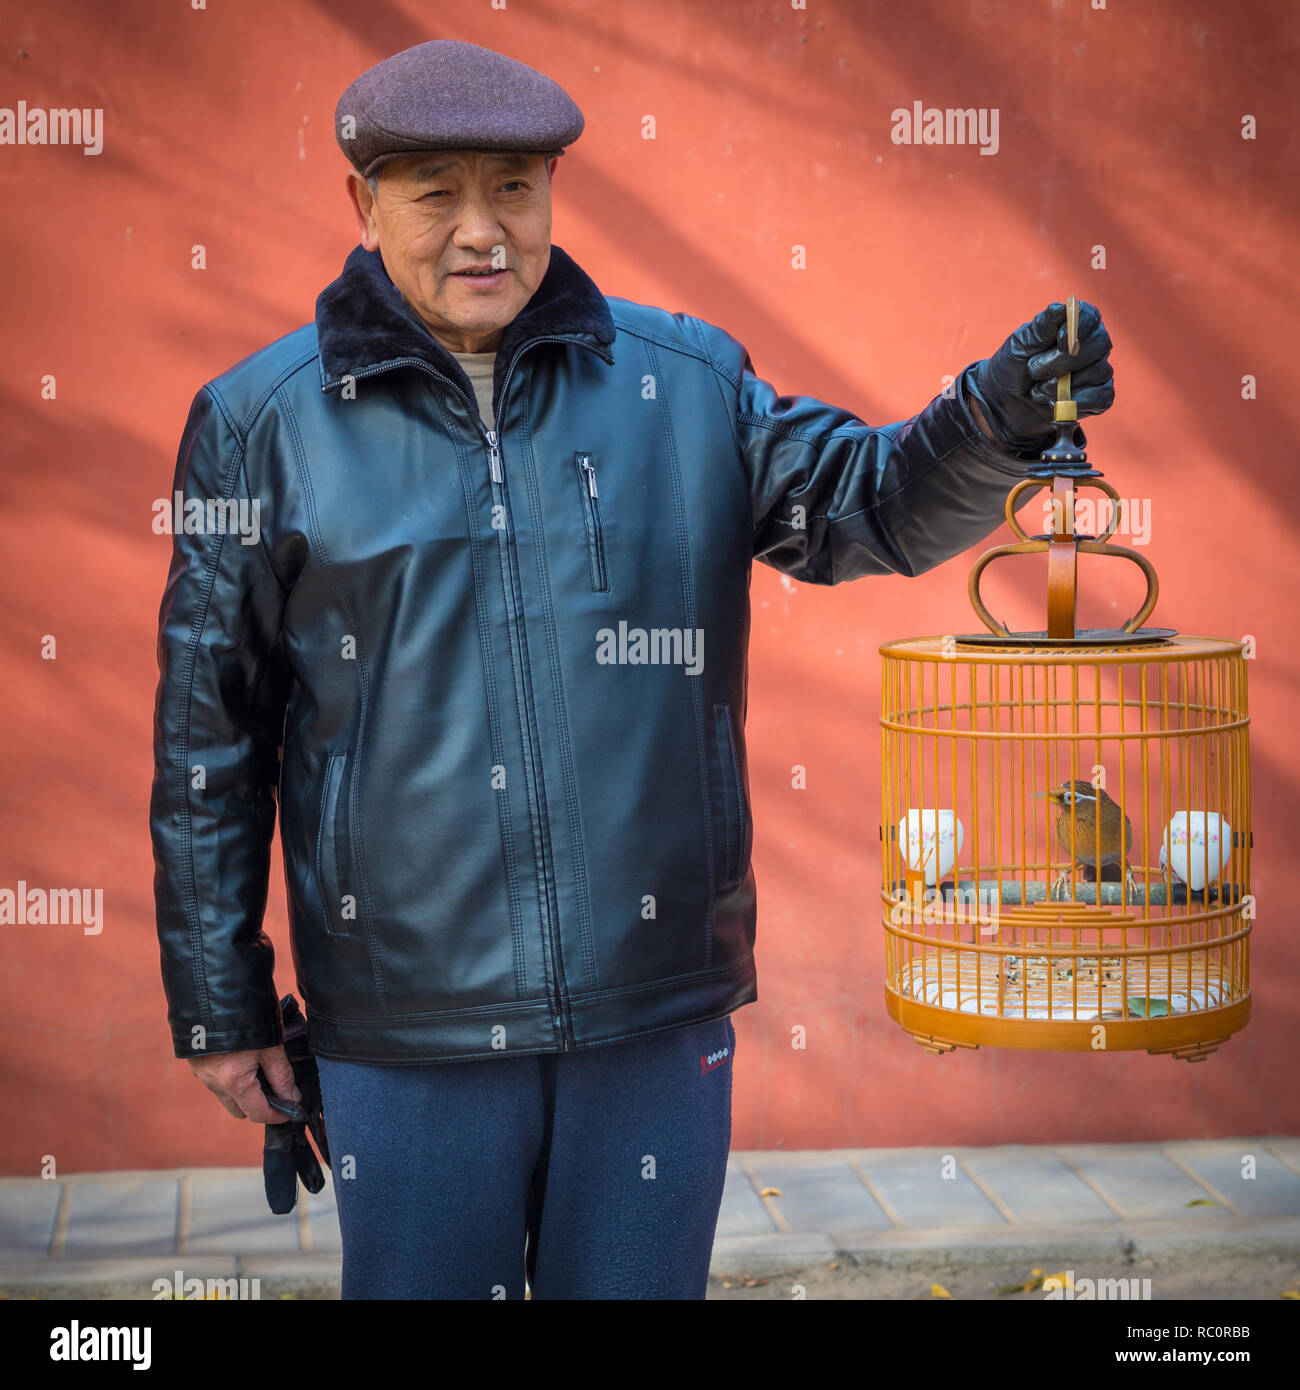 Man in Beijing, China carrying a cage with a pet bird. Stock Photo